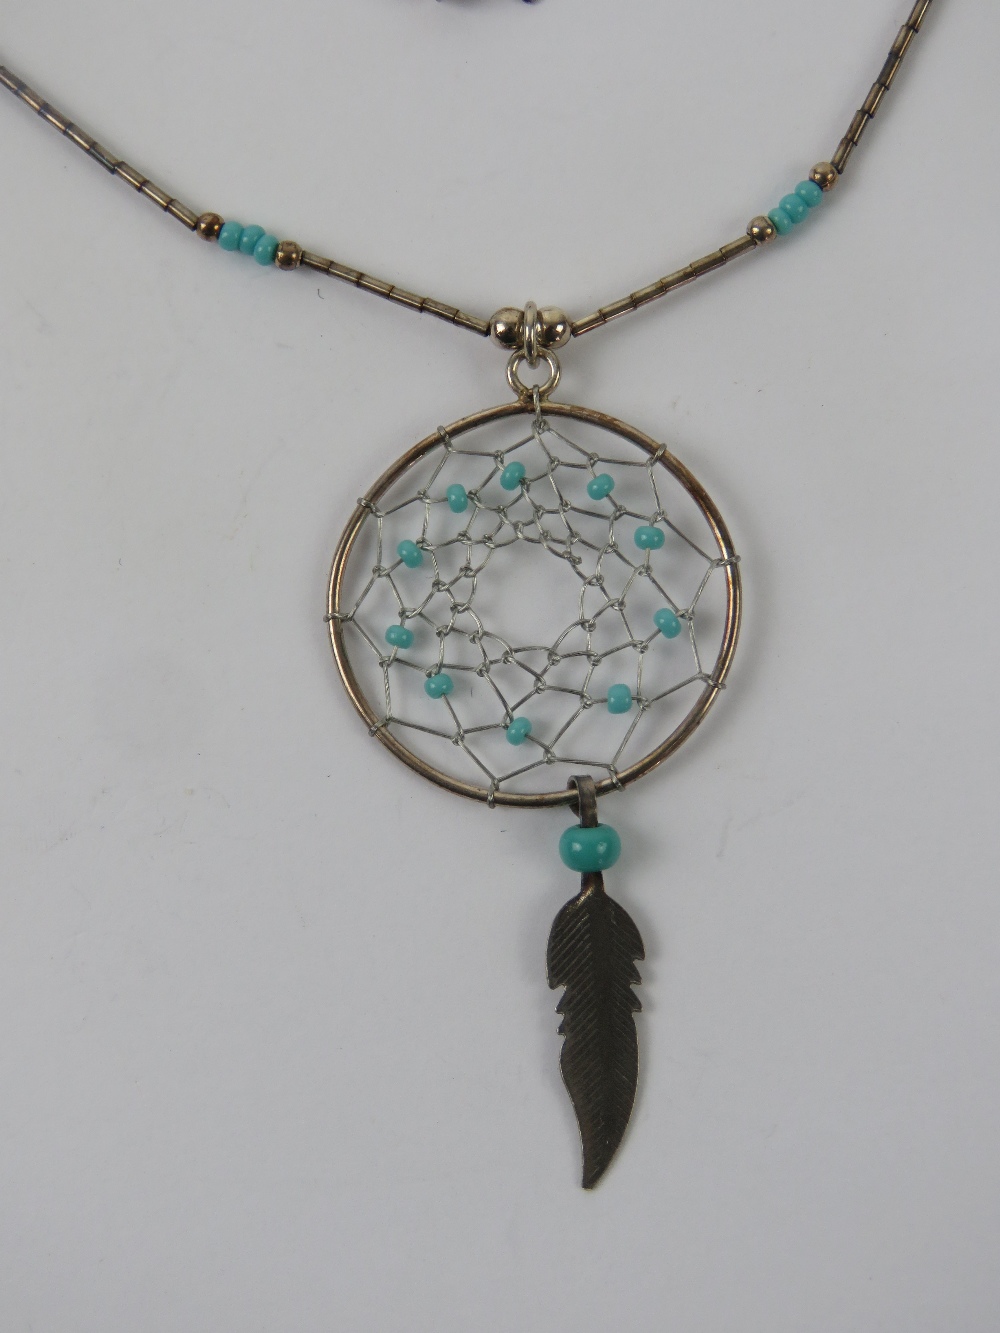 A Native American dream catcher necklace, Navajo style, stamped 925 to the clasp. - Image 2 of 3